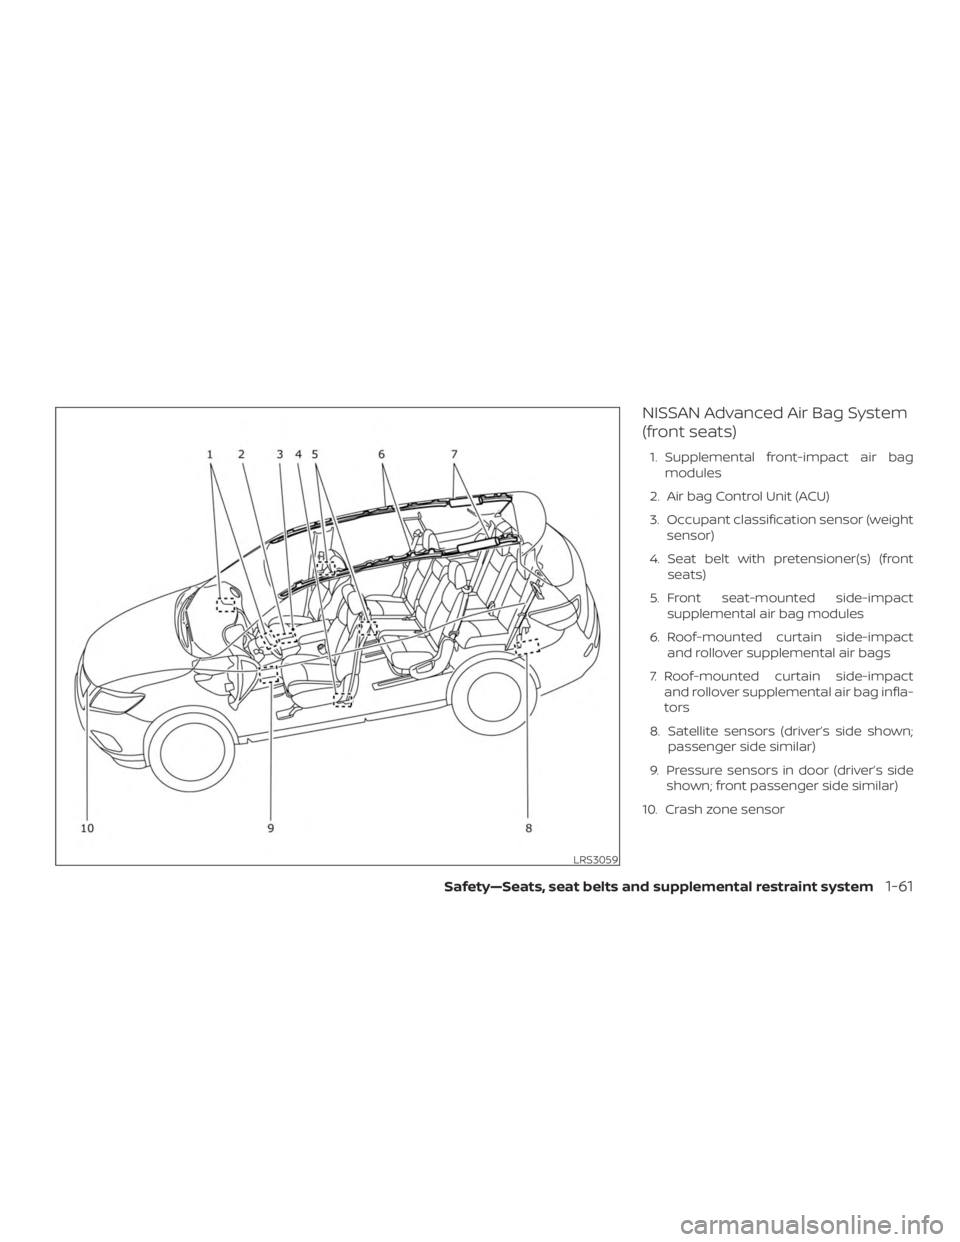 NISSAN PATHFINDER 2020  Owner´s Manual NISSAN Advanced Air Bag System
(front seats)
1. Supplemental front-impact air bagmodules
2. Air bag Control Unit (ACU)
3. Occupant classification sensor (weight sensor)
4. Seat belt with pretensioner(